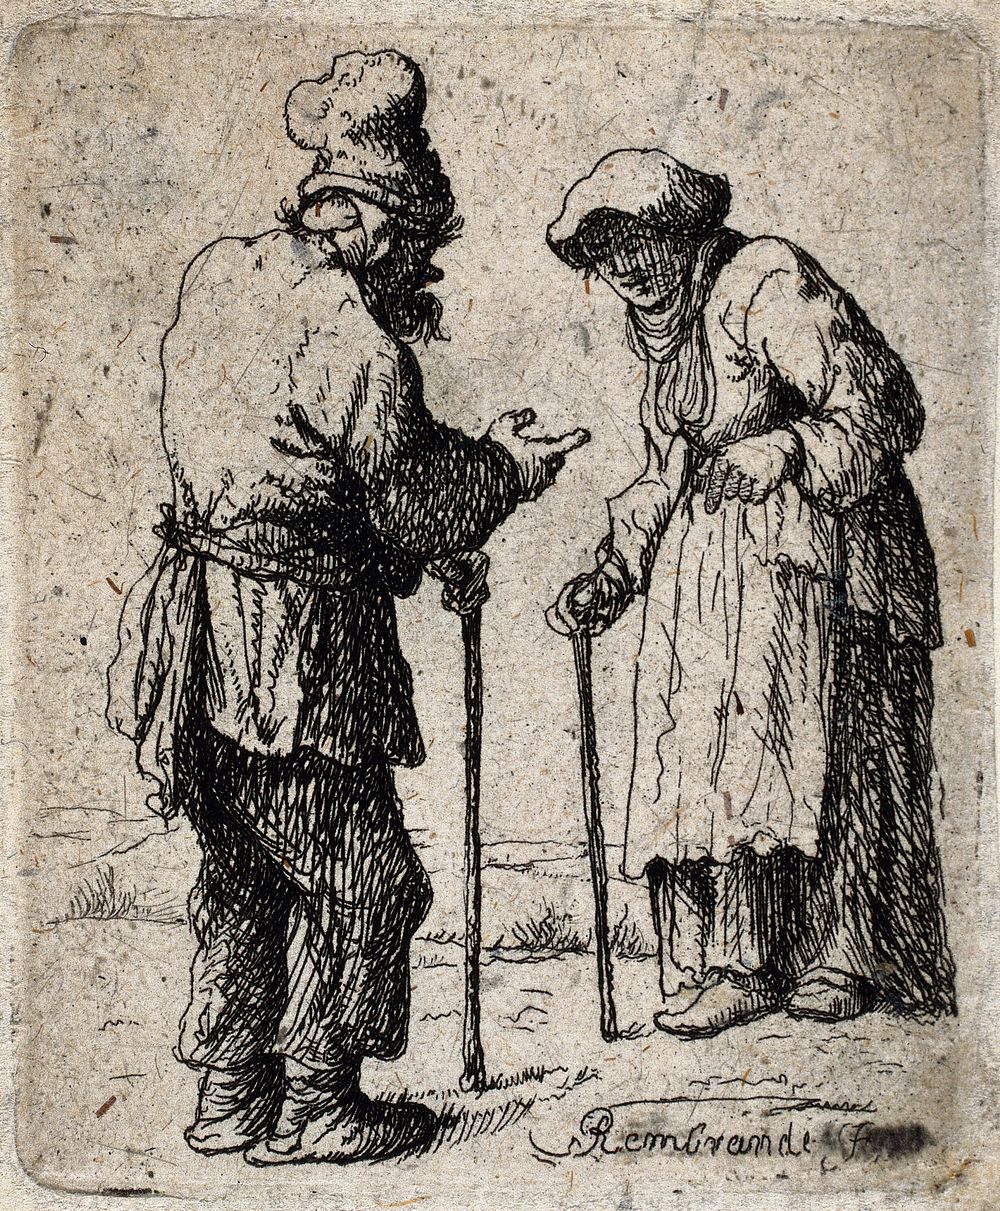 An old man and an old woman conversing while holding on to their walking sticks. Etching in the style of Rembrandt, ca. 1630.